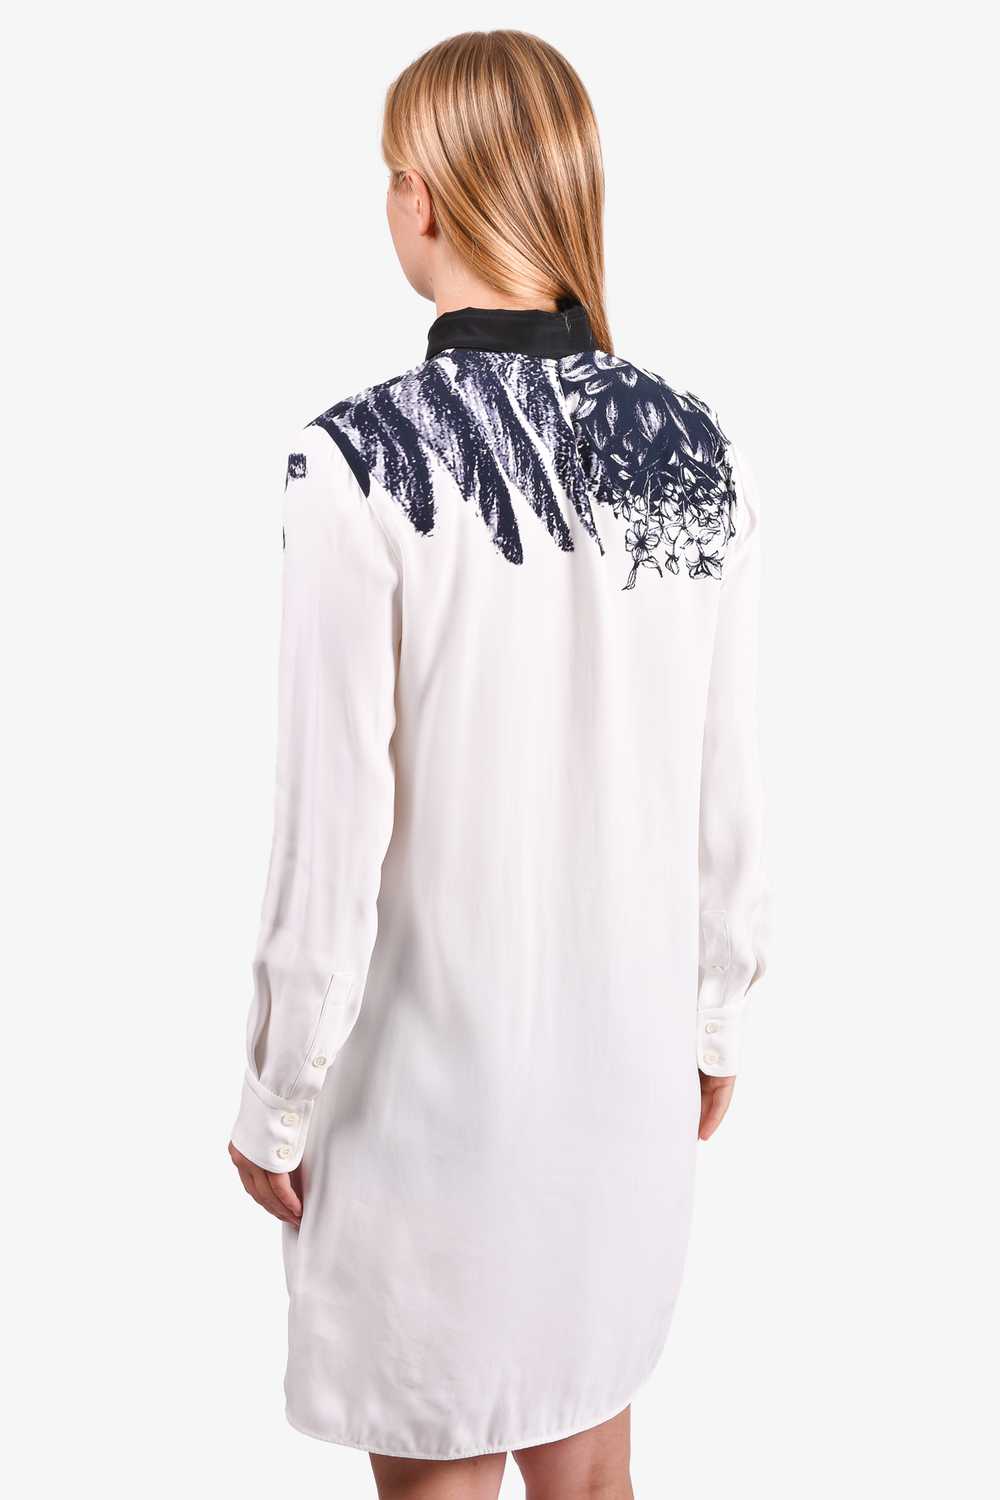 Carte Blanche by Sportmax 2015 White/Navy Printed… - image 4